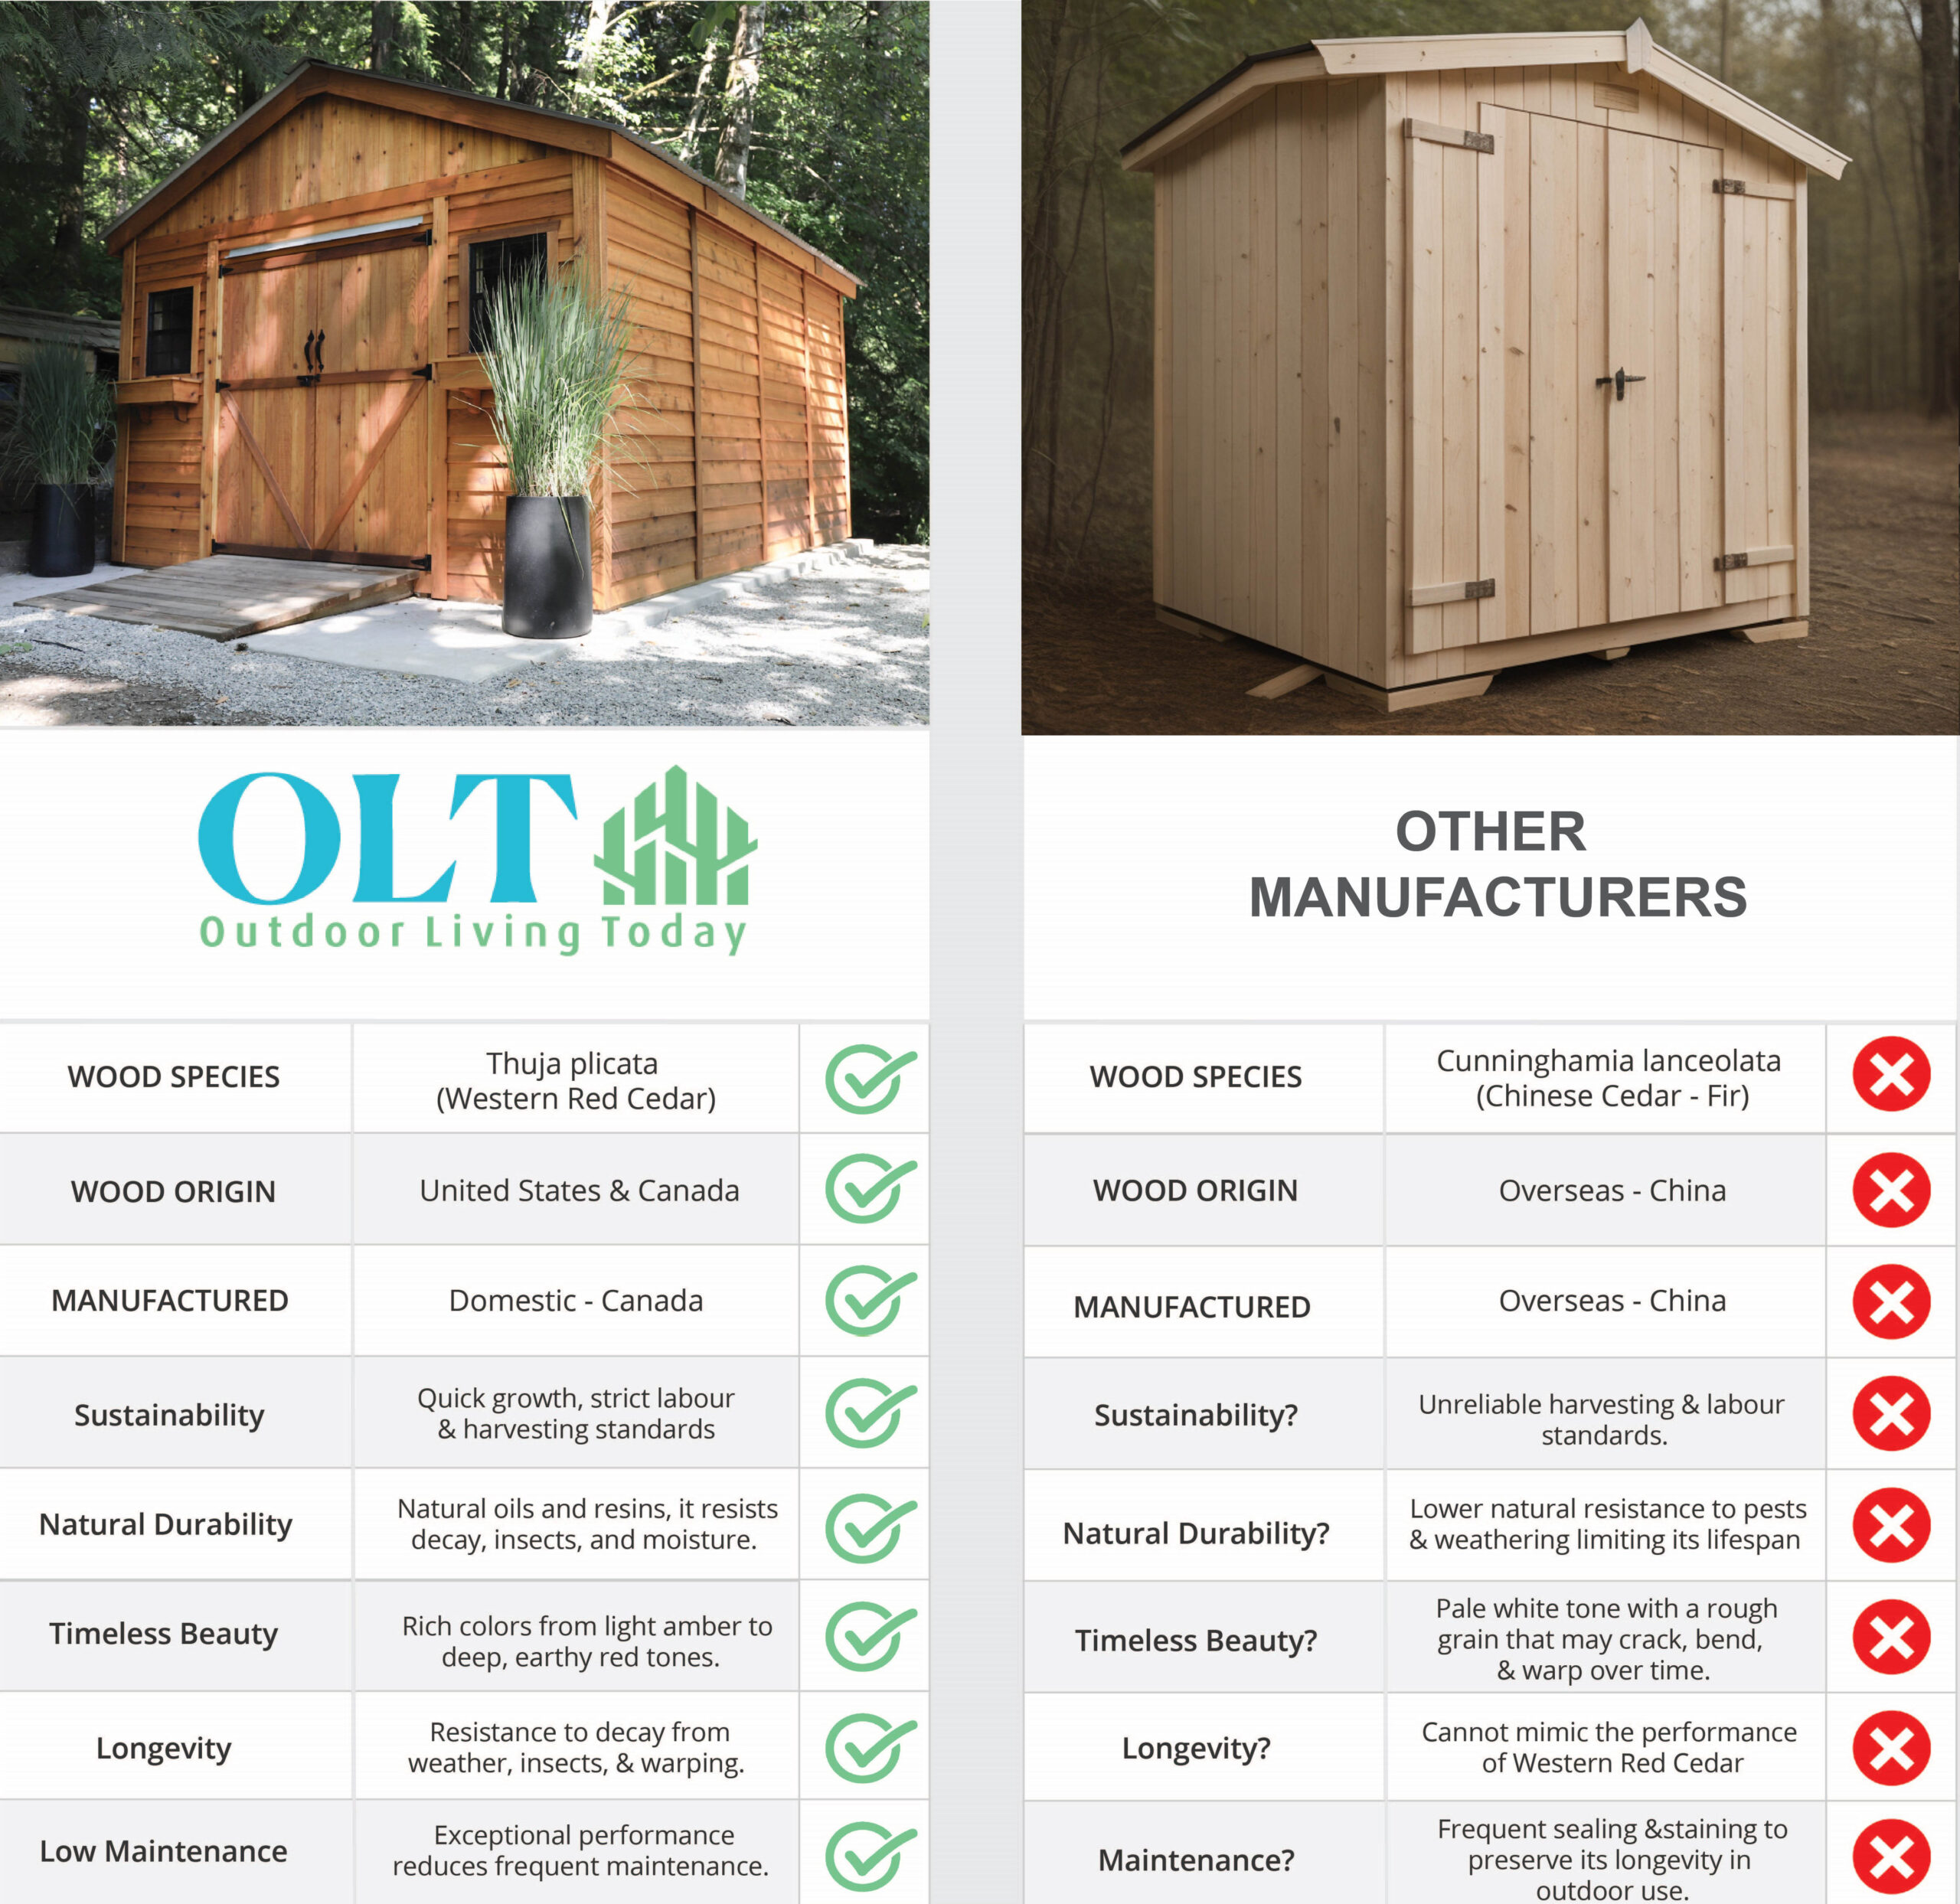 Western Red Cedar Sheds Vs Imitation Products